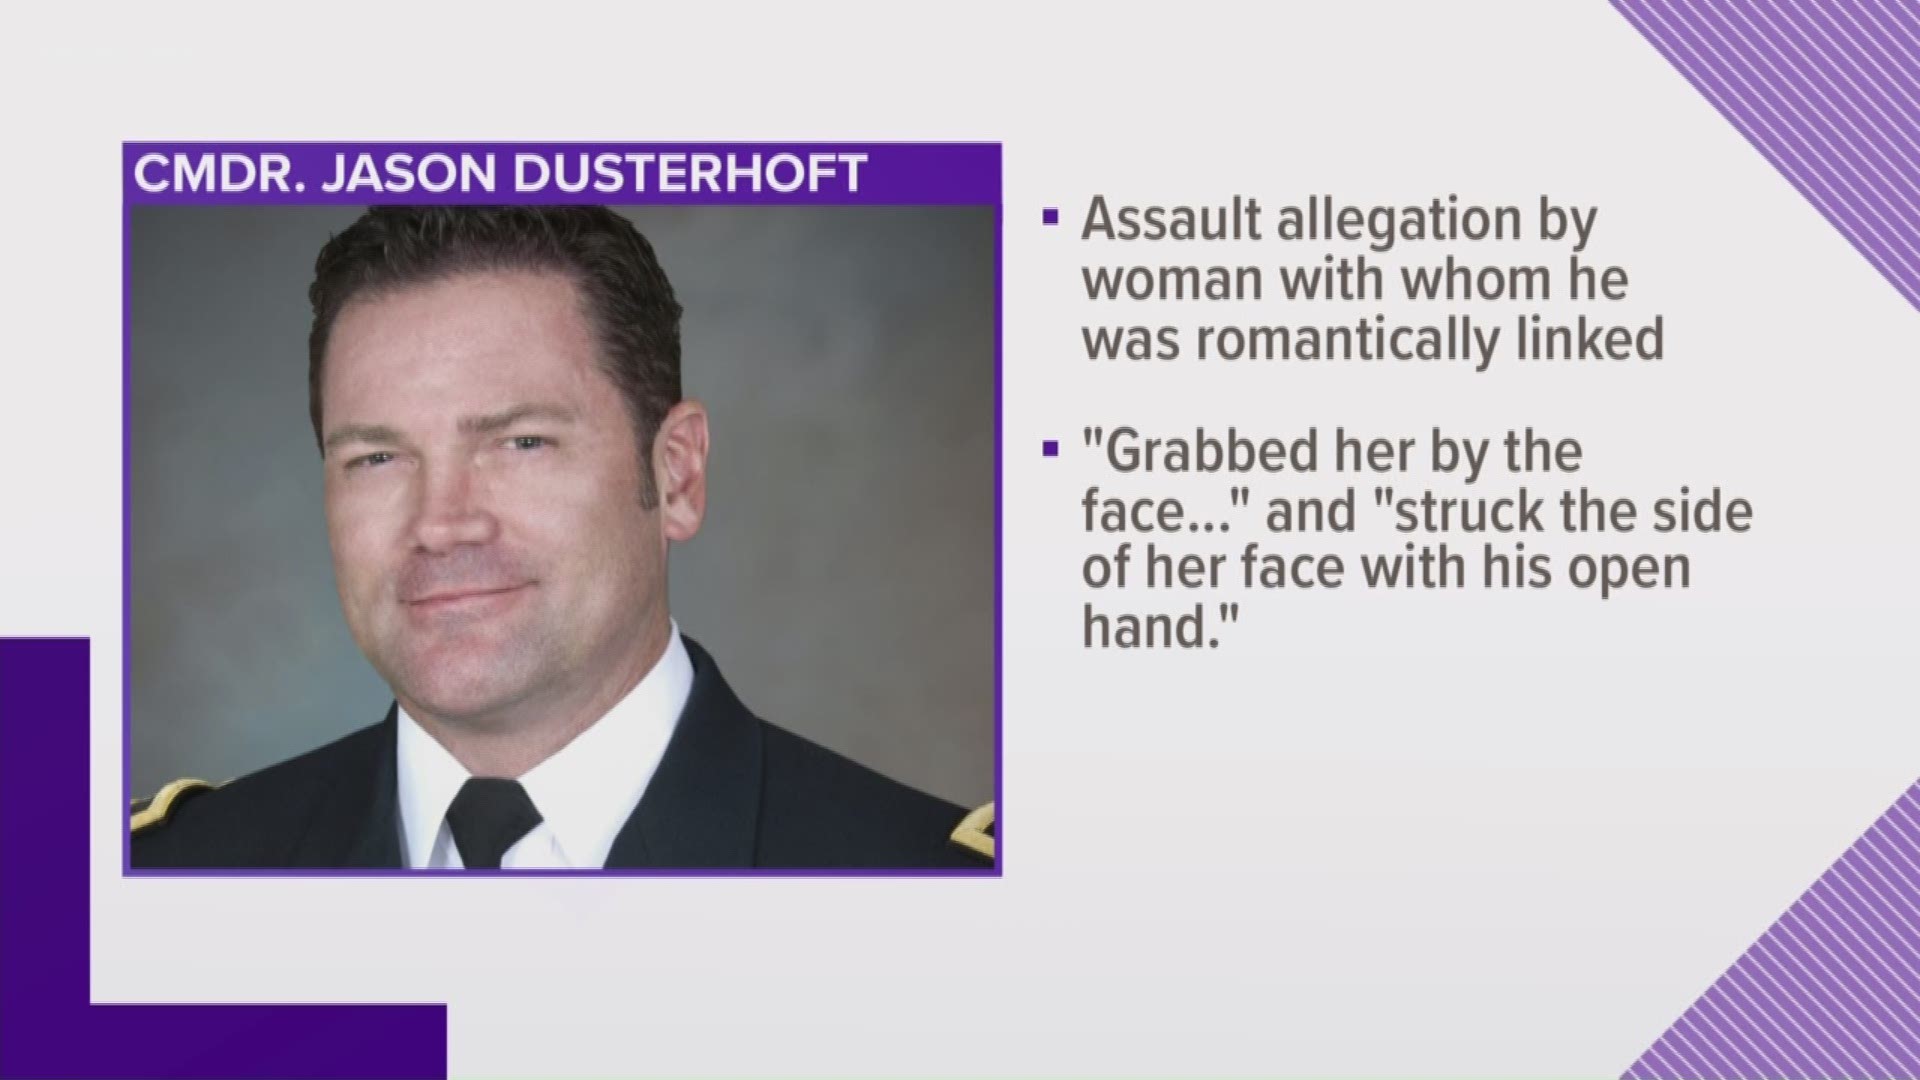 An Austin police commander, who once served as an assistant chief for the department, has been under investigation for more than a month after being accused of assaulting a woman at a local gentlemen's club - an allegation he denies.